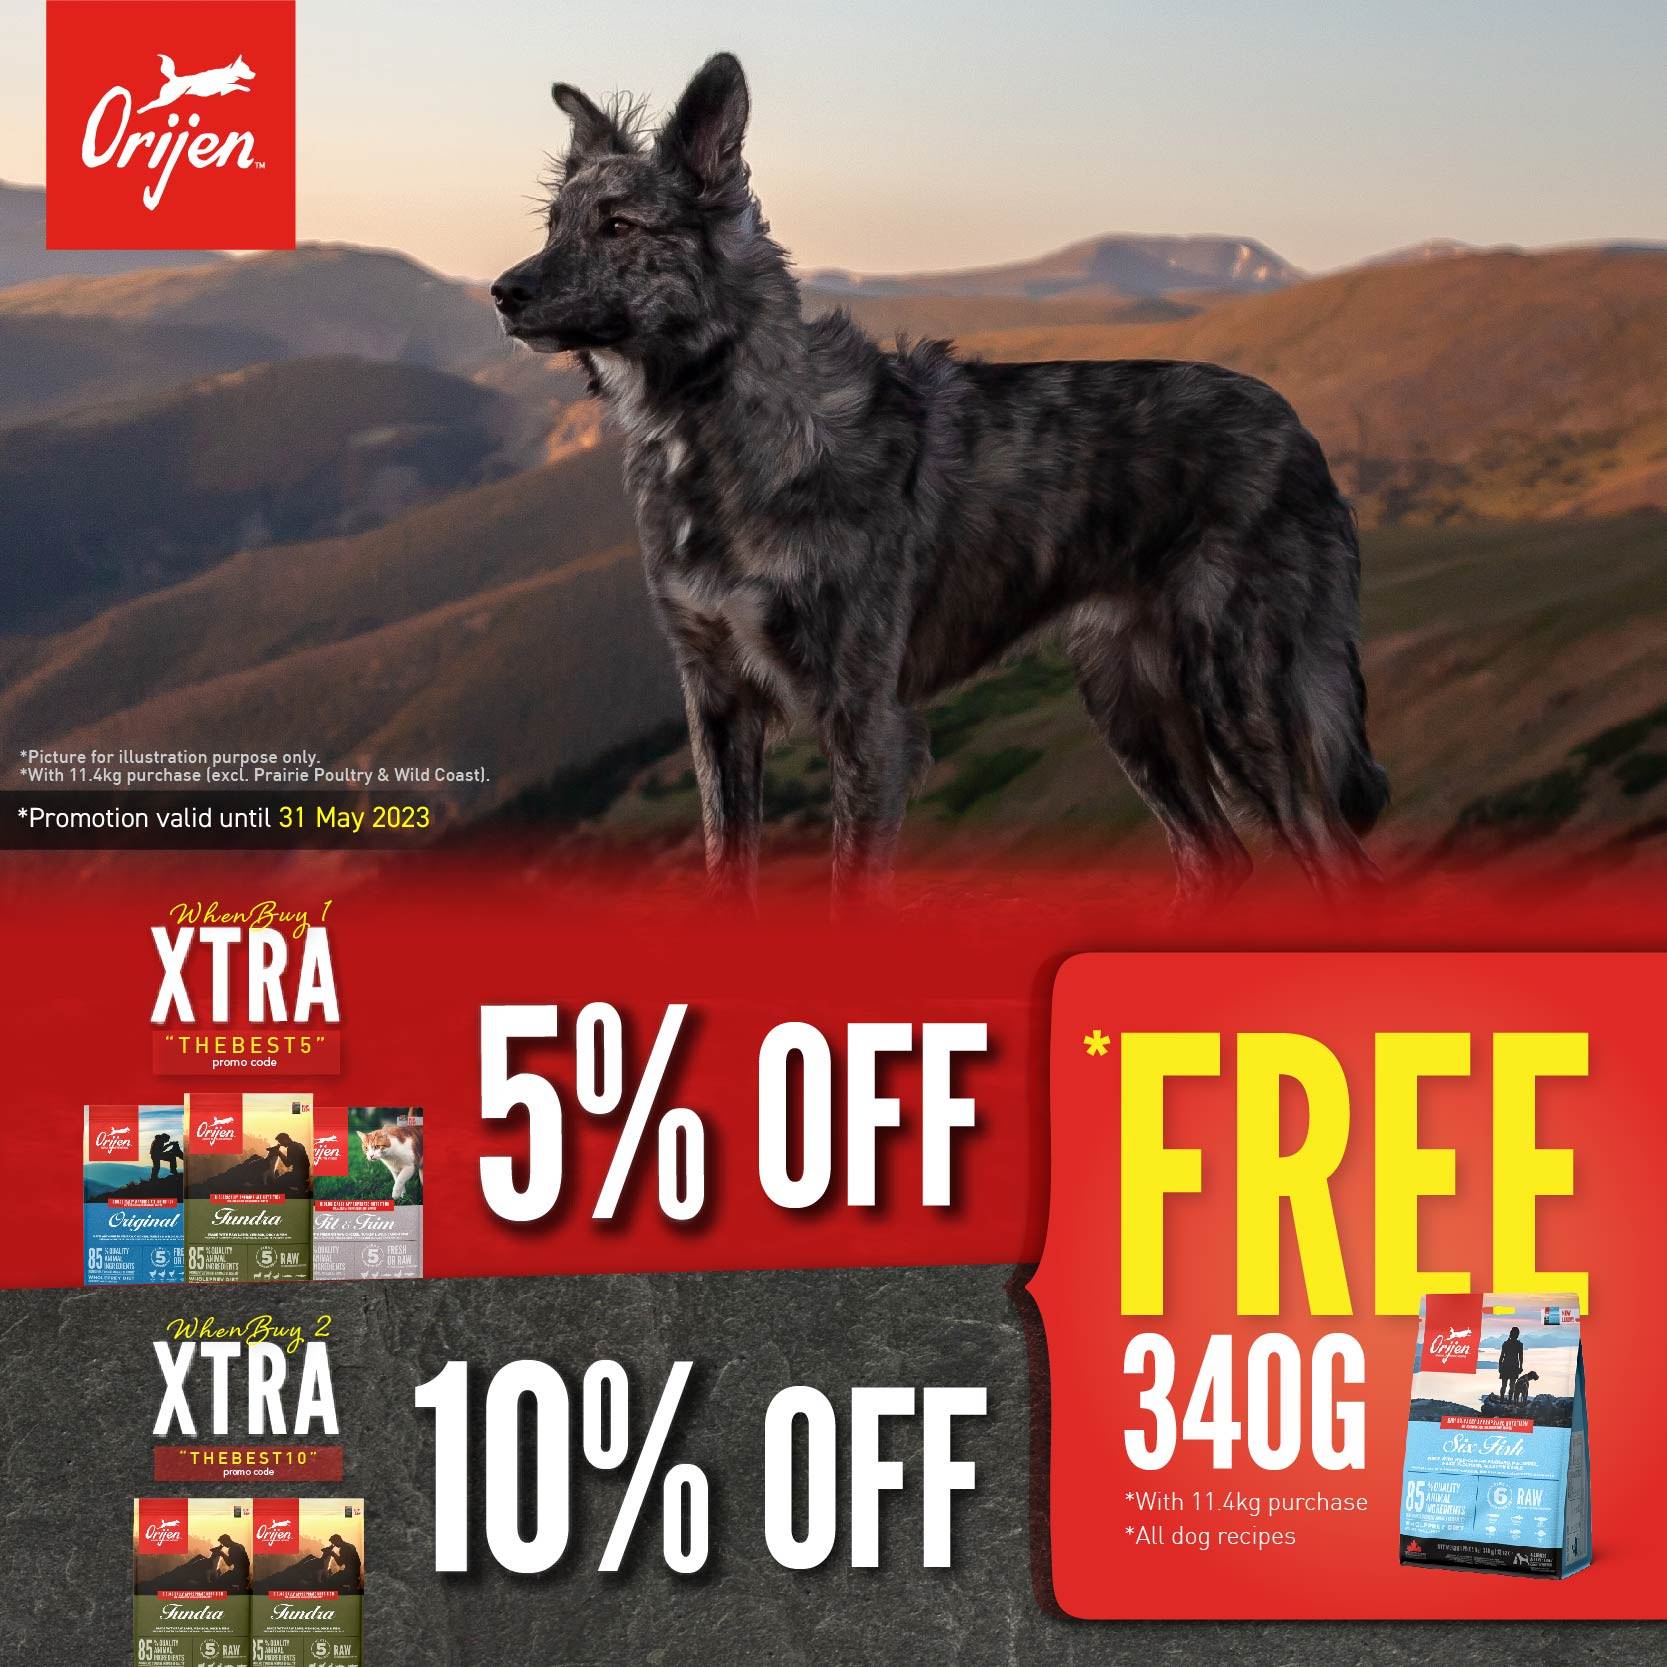 ORIJEN pet food promotion with free 340g for dog recipes of 11.4kg.